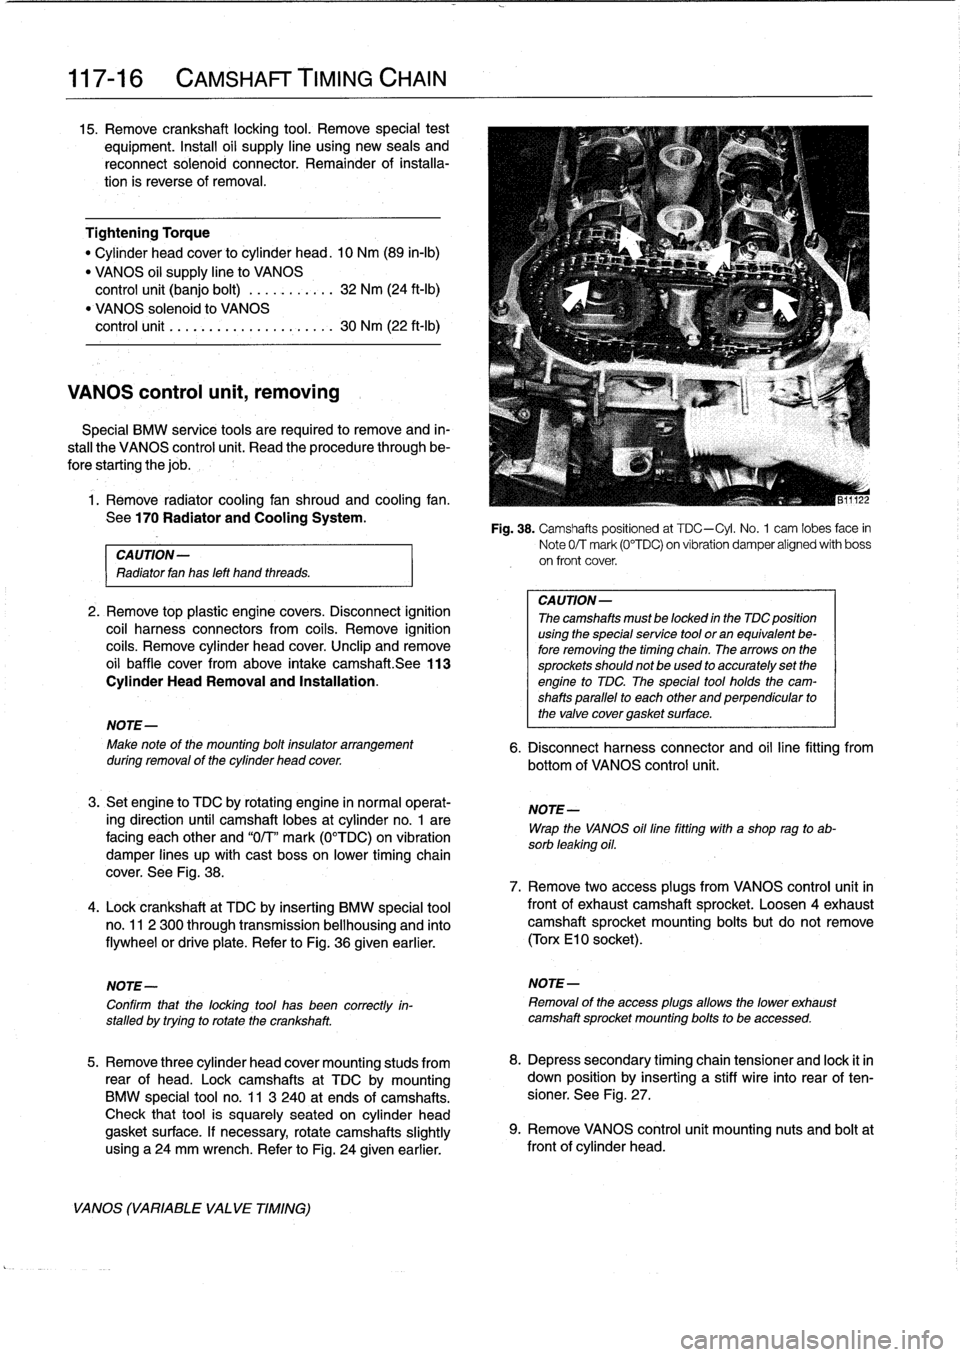 BMW 325i 1992 E36 Owners Guide 
117-
1
6

	

CAMSHAFT
TIMING
CHAIN

15
.
Remove
crankshaft
locking
tool
.
Remove
special
test

equipment
.
Insta¡¡
oil
supply
line
using
new
seals
and

reconnect
solenoid
connector
.
Remainder
of
i